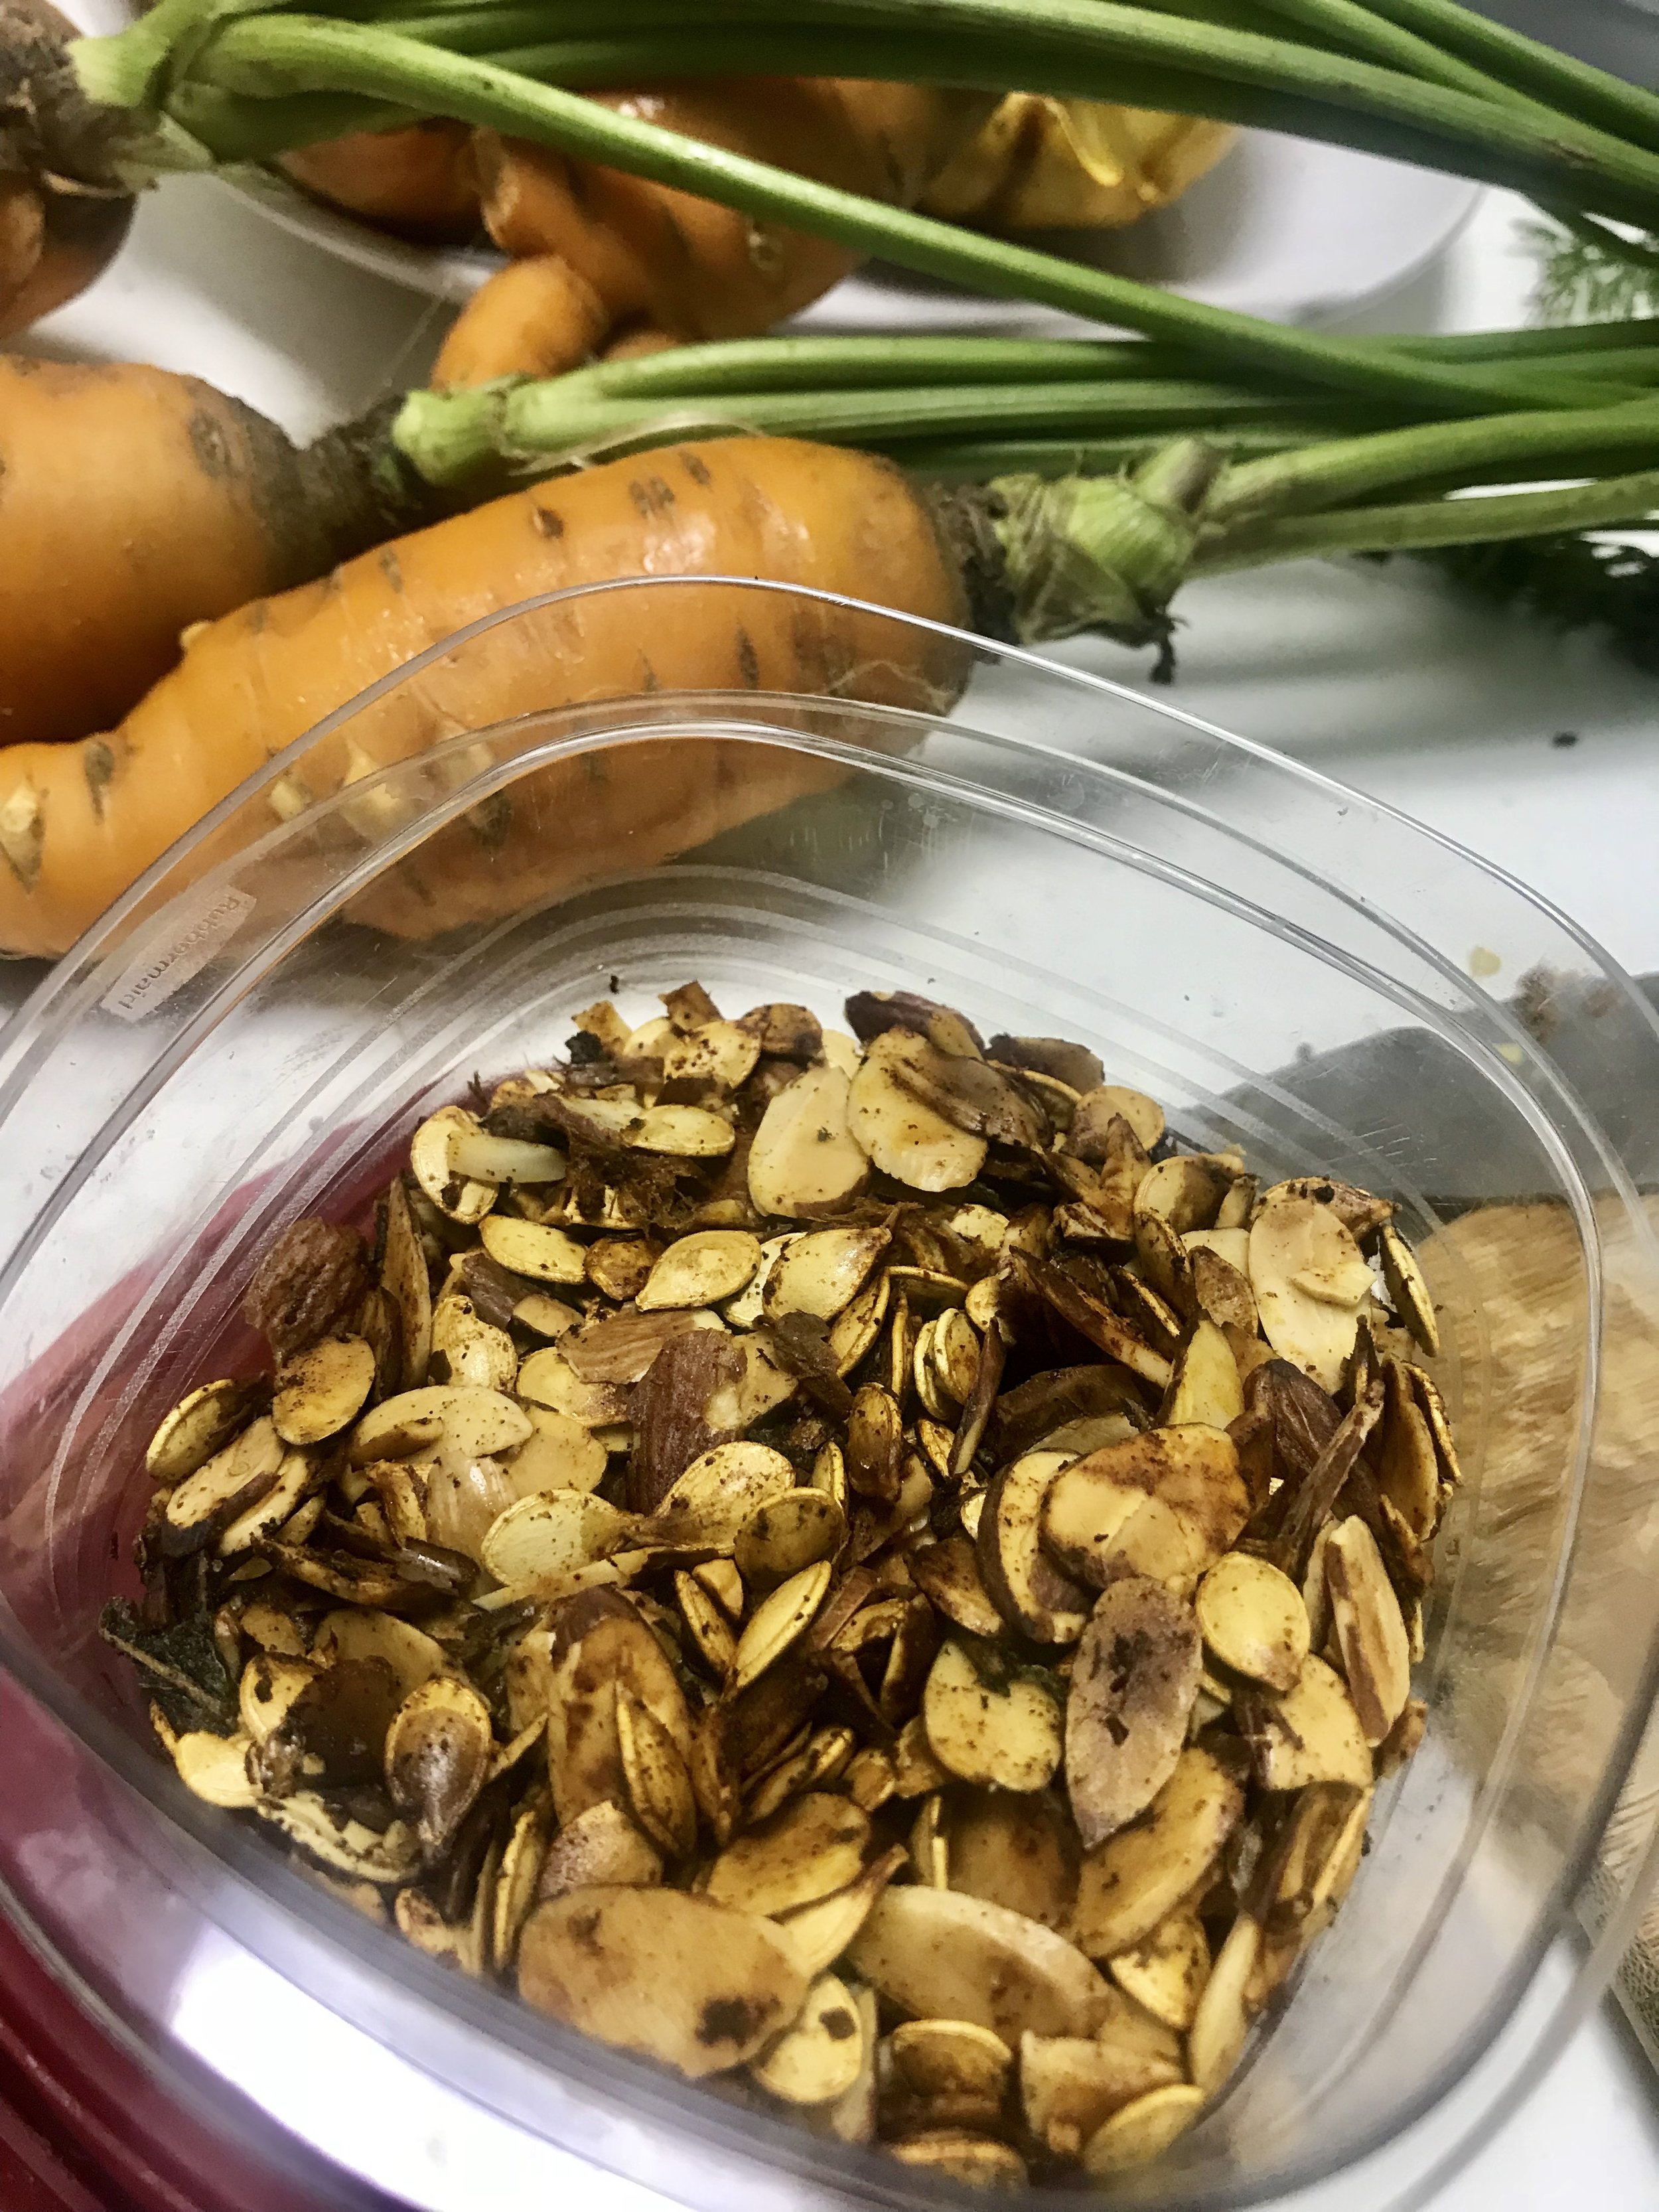 Roasted almonds and squash seeds